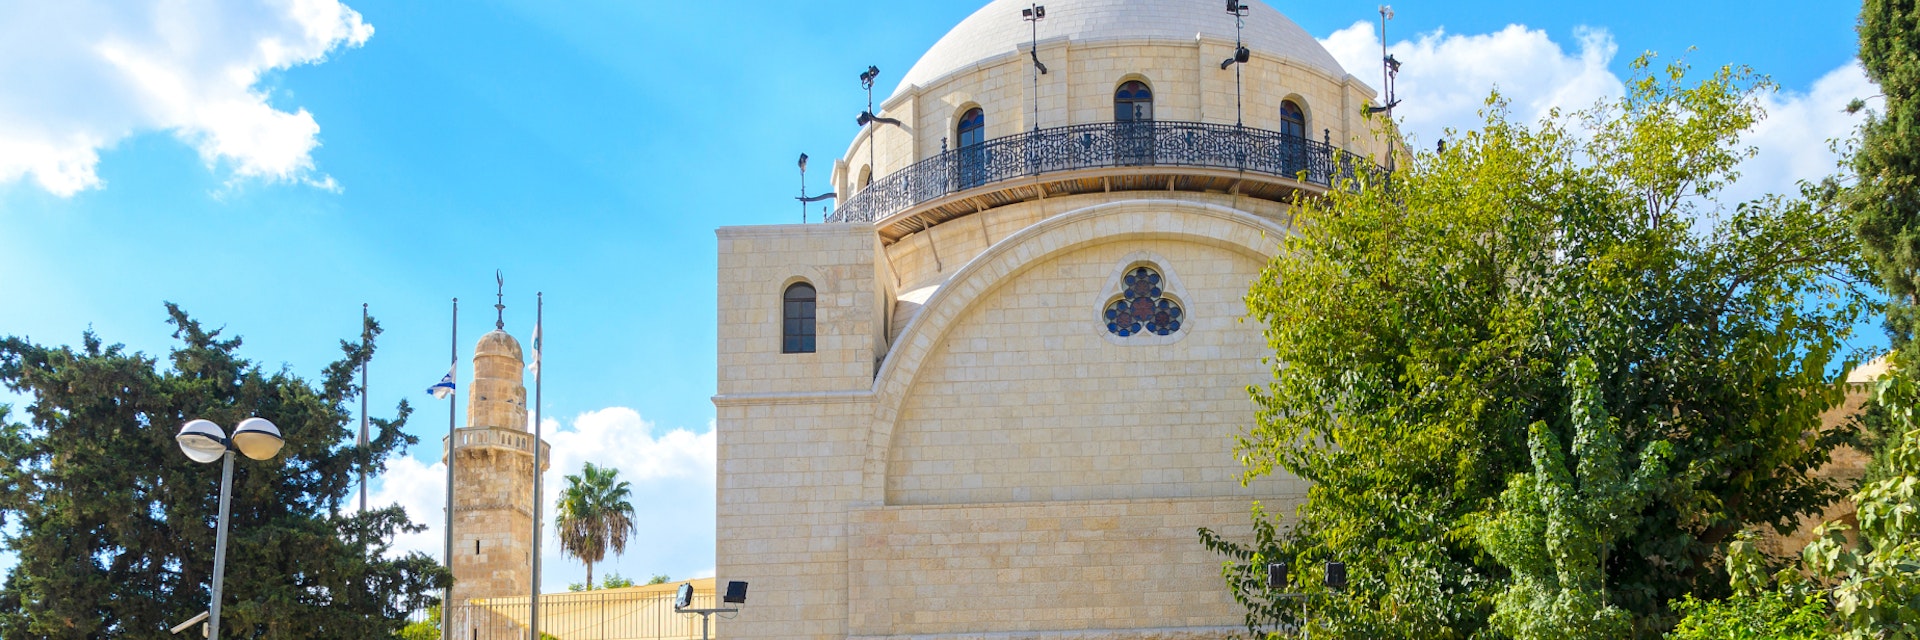 The Hurva Synagogue. Old city Jerusalem, Jewish quarter, Israel. It was first founded in the early 18th century and destroyed by the Arab Legion in 1948. It has been newly rebuilt in march 2000. ; Shutterstock ID 546798607; Your name (First / Last): Lauren Keith; GL account no.: 65050; Netsuite department name: Online Editorial; Full Product or Project name including edition: Israel Update 2017